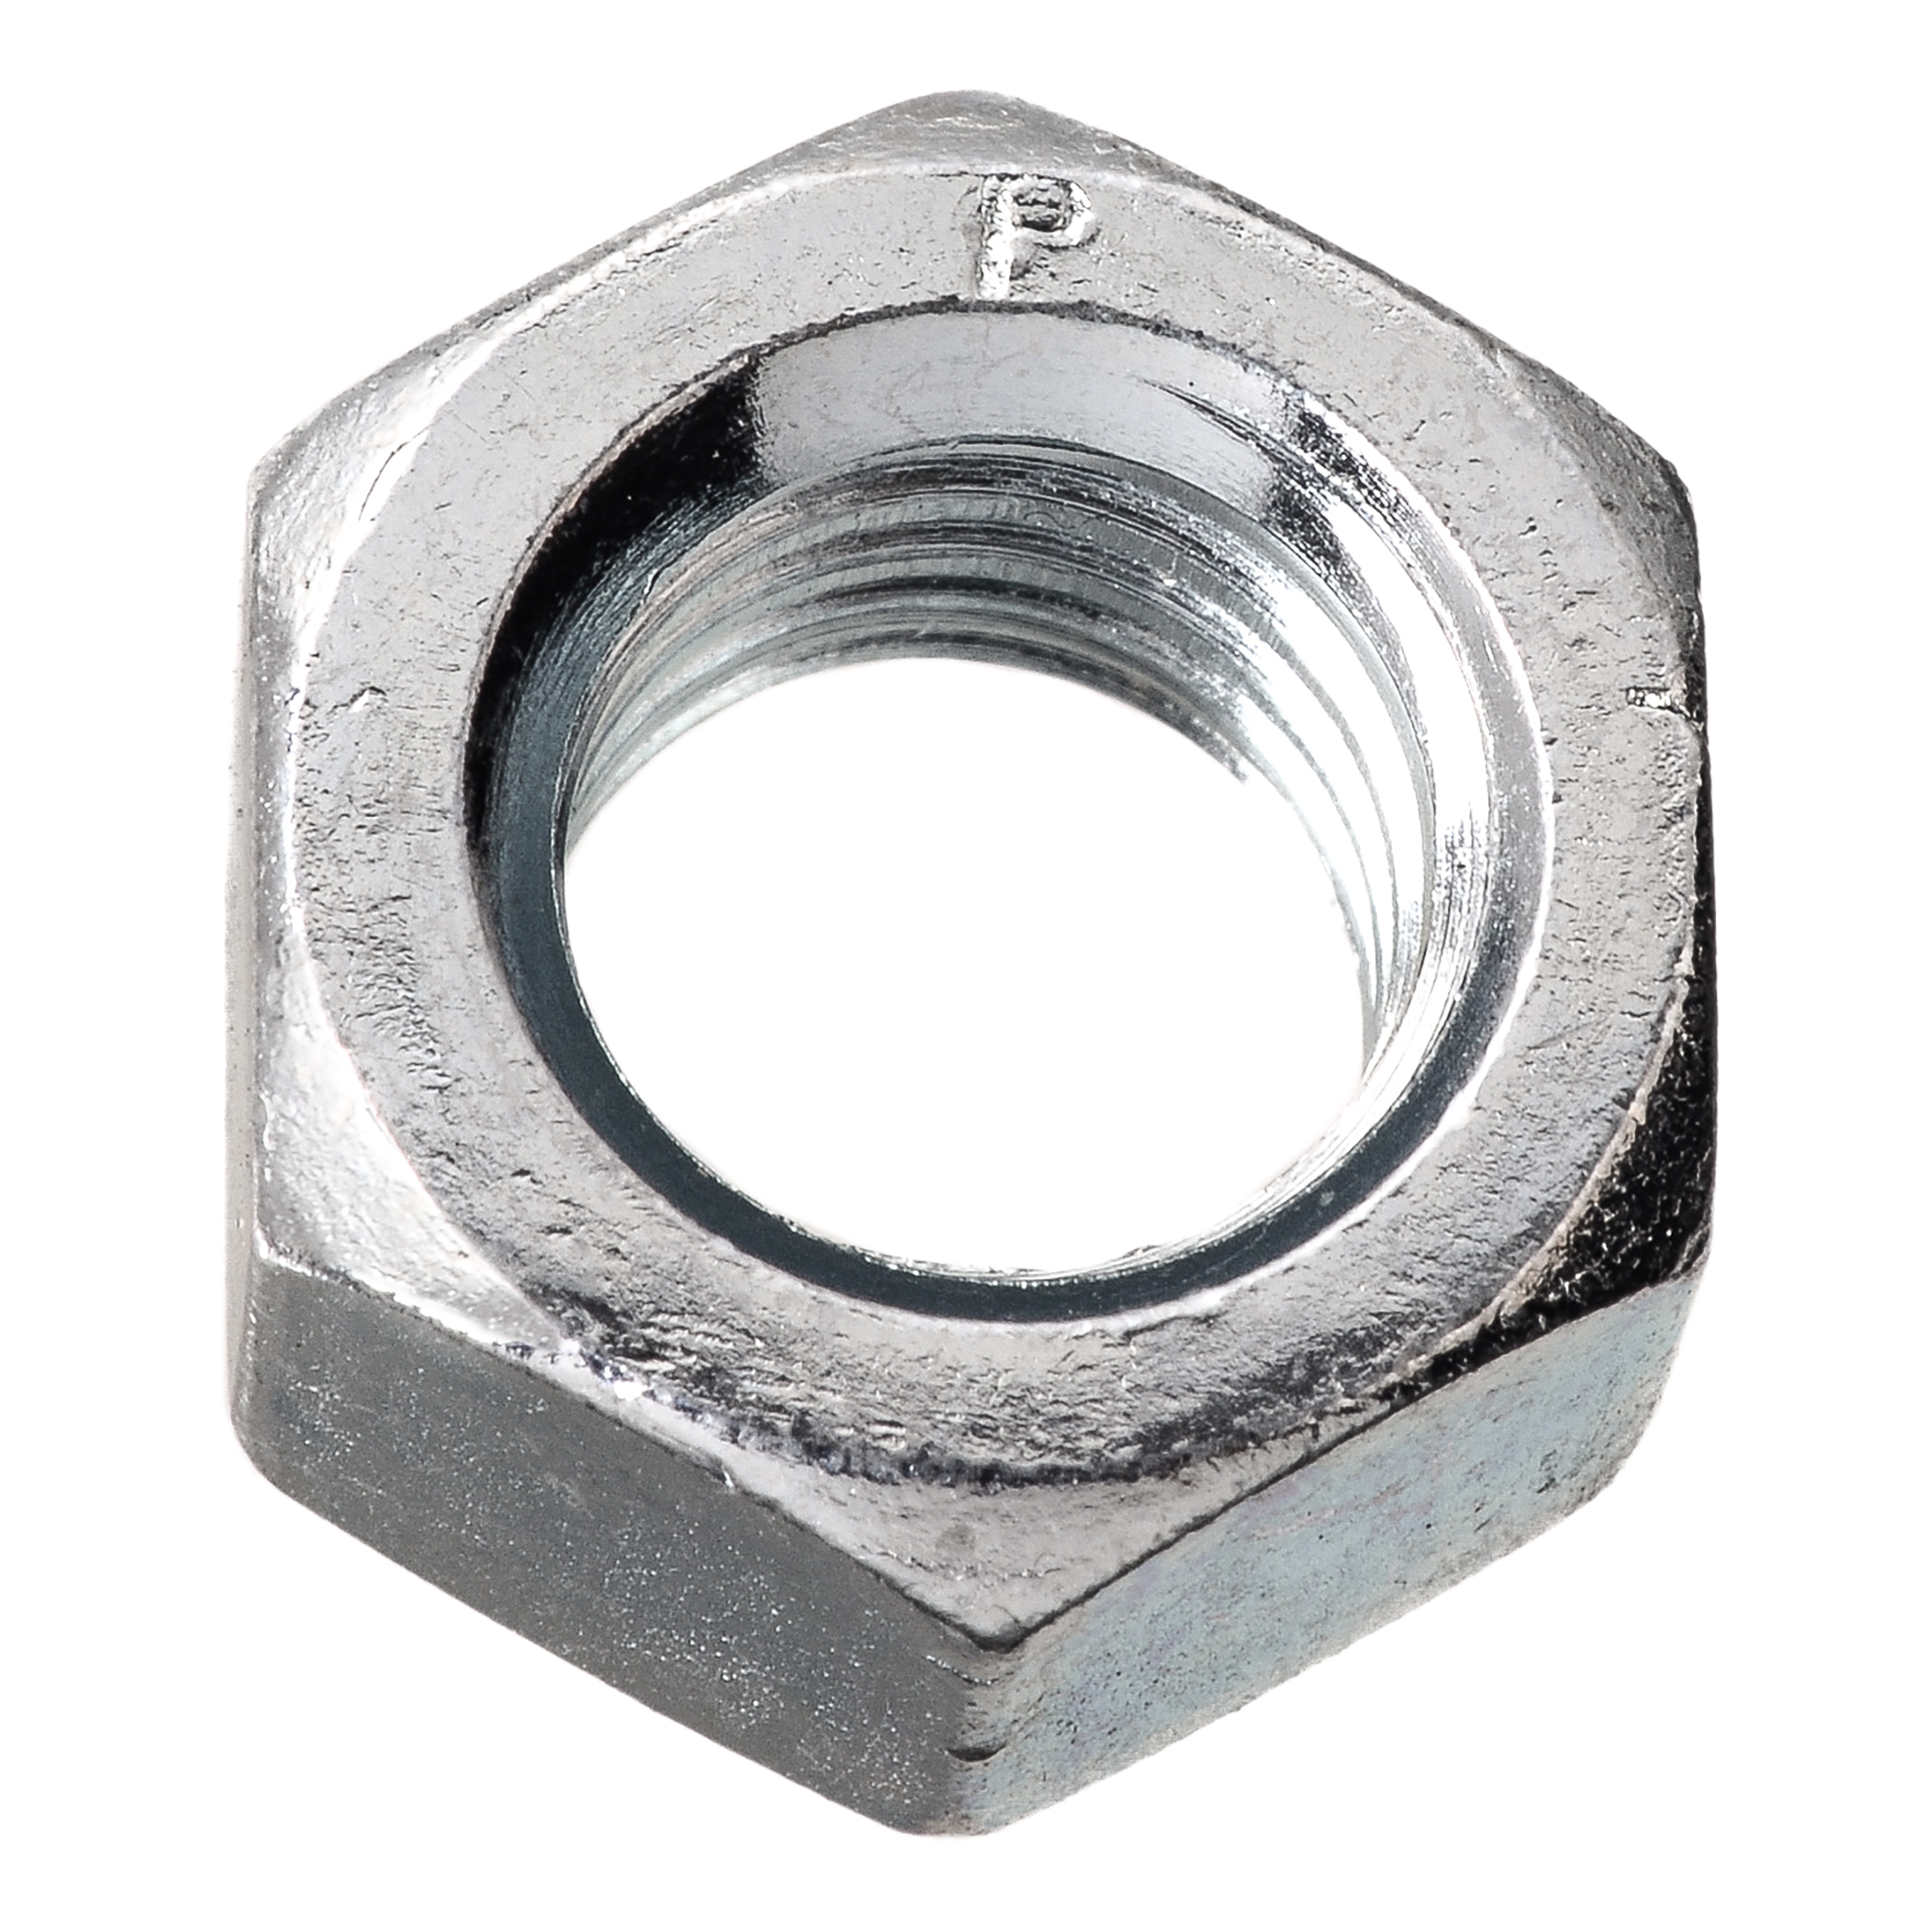 Square Nuts Hot Dipped Galvanized Grade 2-1/4"-20 UNC Qty-1000 